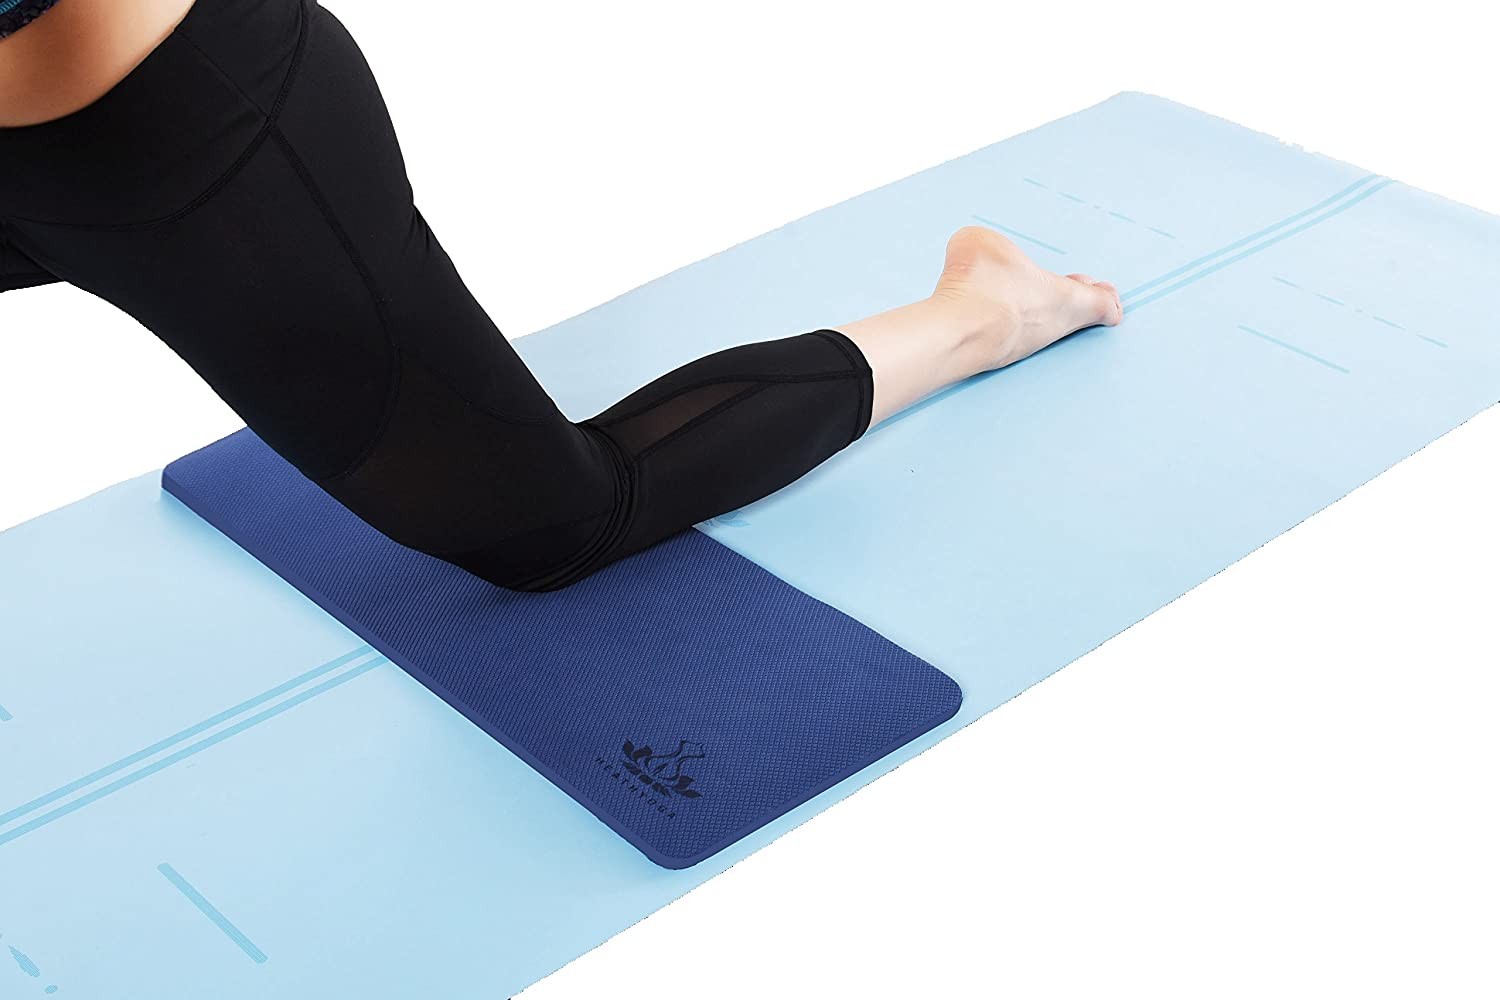 Head 24 x 10-0.6” Thickness Wrists and Elbows YOGU Yoga Knee Pad- Kinesis Yoga Knee Pad Cushion for Extra Padding and Support for Knees 